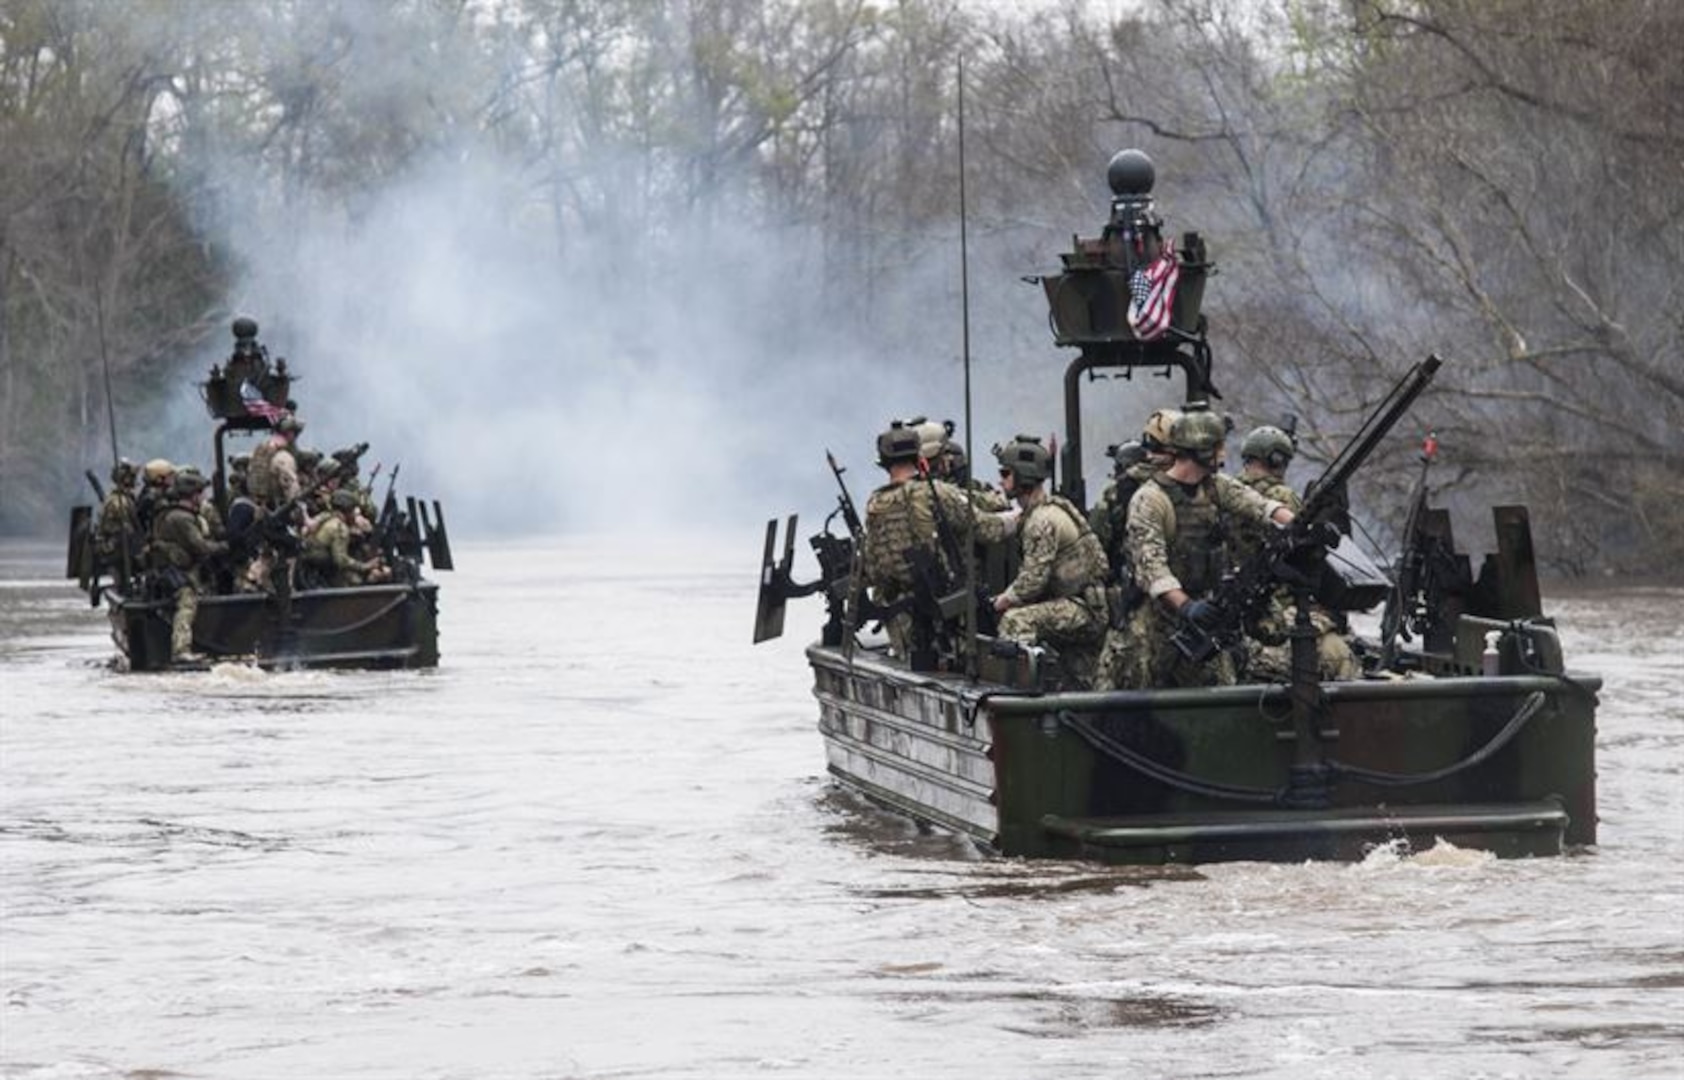 Army Lt. Gen. Raymond A. Thomas III, Commander, Joint Special Operations Command, participates in a riverine demonstration with members of Special Boat Team 22 at the Naval Small Craft Instruction and Technical Training School in Mississippi, March 12, 2015. Thomas now commands U.S. Special Operations Command. (U.S. Navy photo by Seaman Richard Miller/Released)